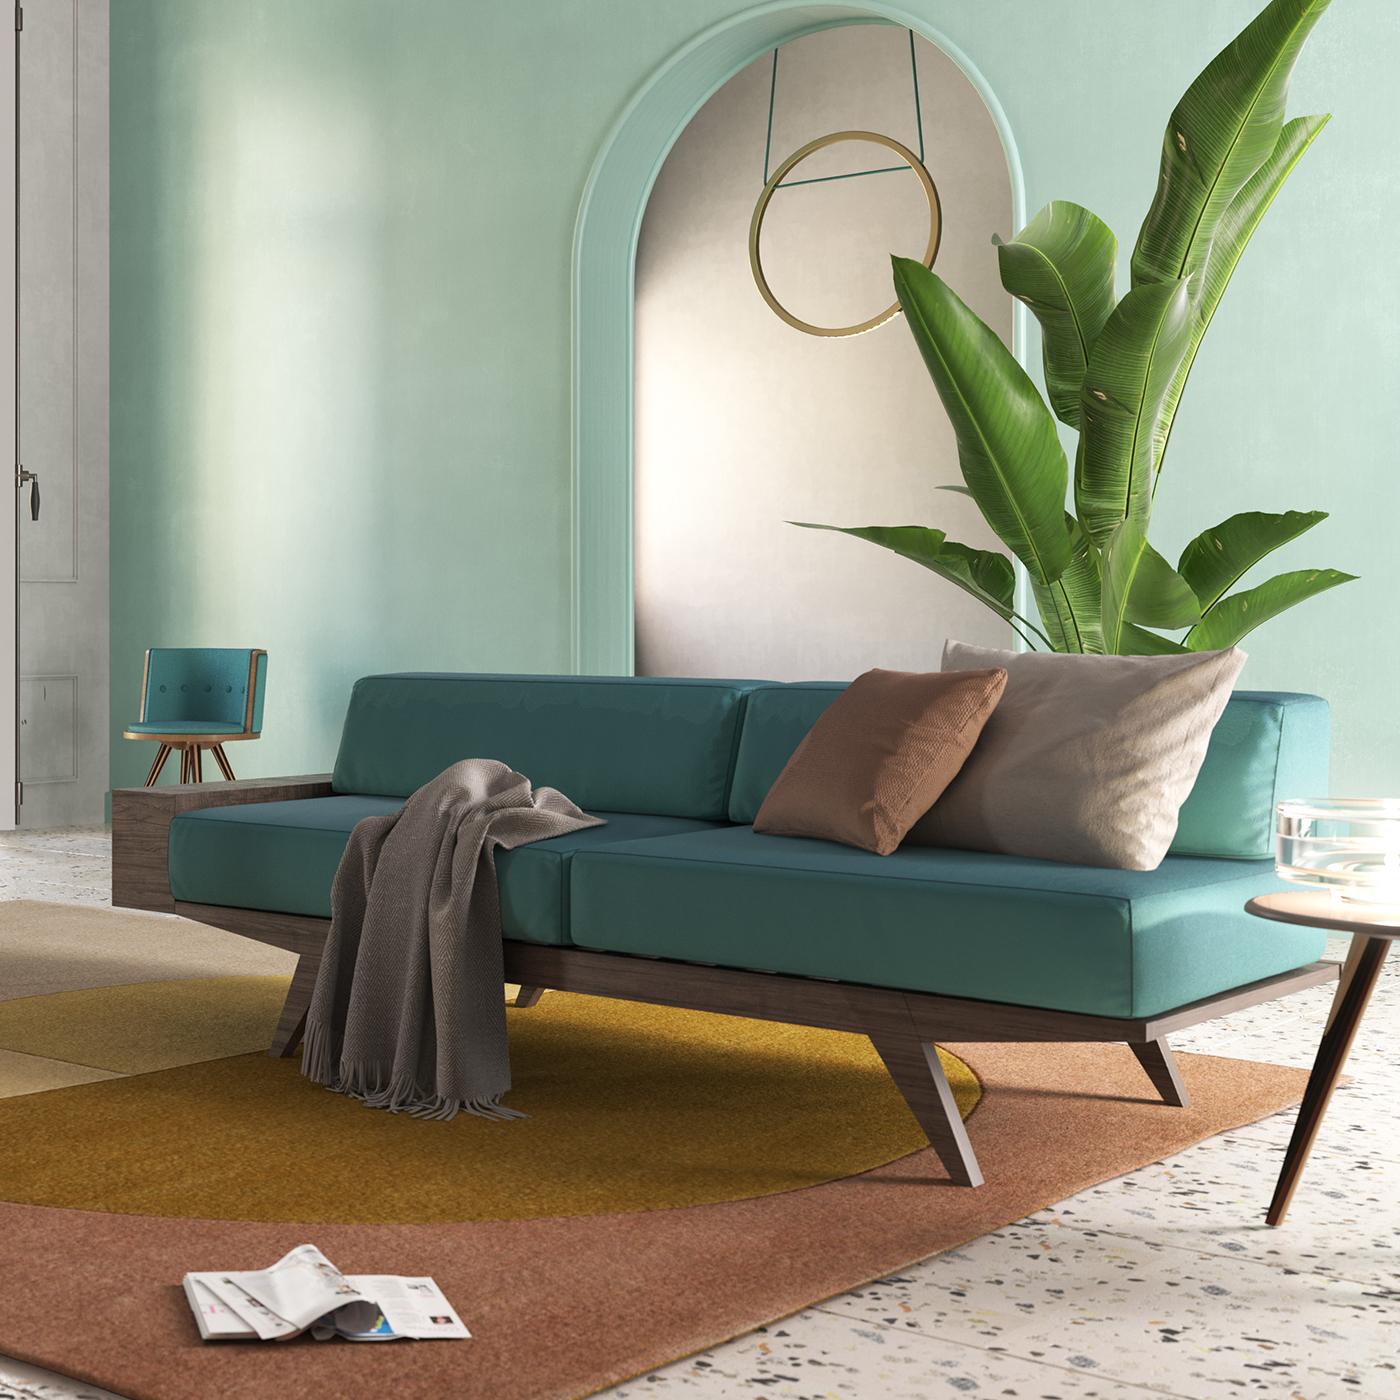 The Giò collection has been designed by the company’s internal Research Center. Giò is a collection, in which design and functionality meet. The sofa bed has a maple on cherrywood frame and armrest with two storage compartment. Cushions are